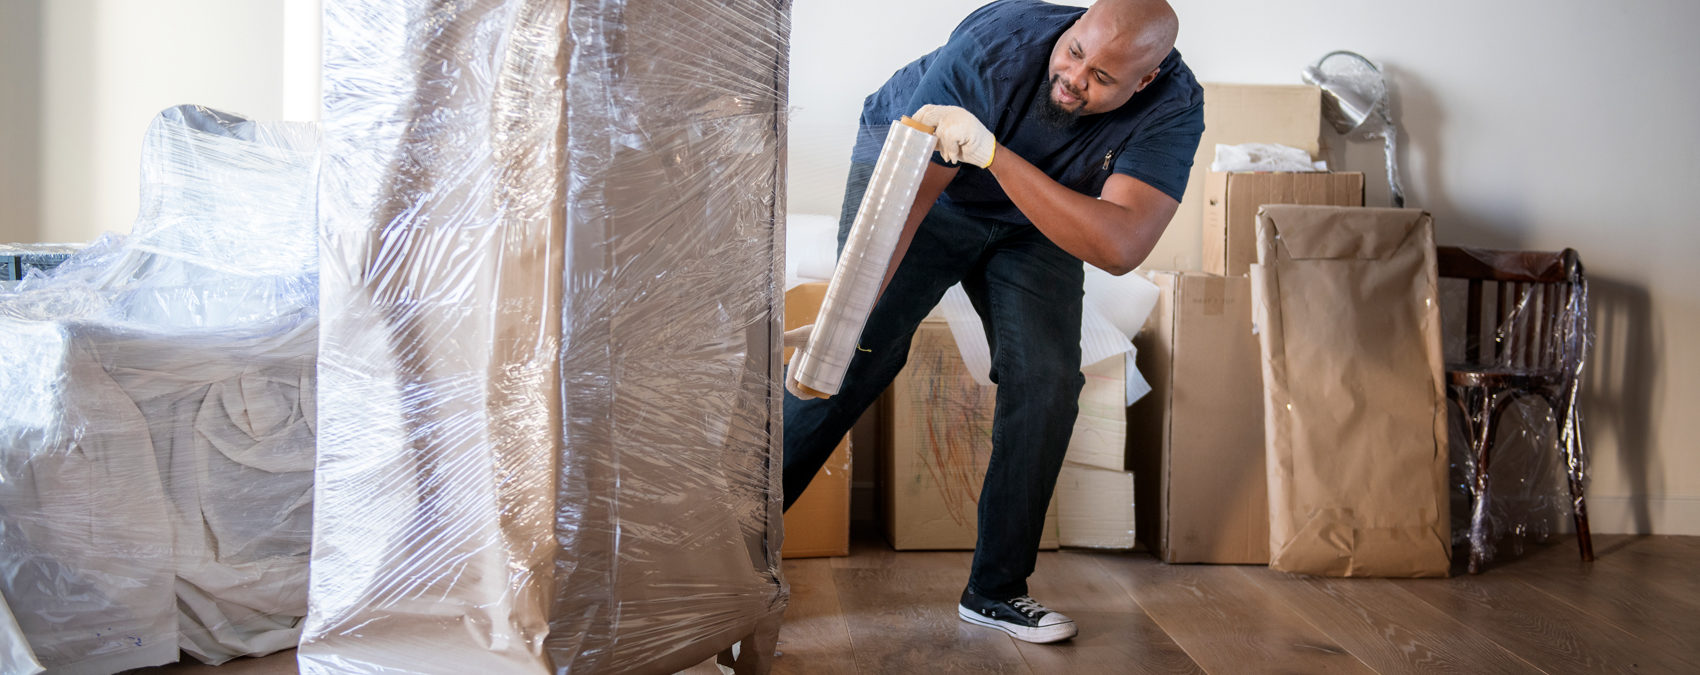 Uplift Your SEO: 7 Ways to Help Your Moving Company Show Up in Search